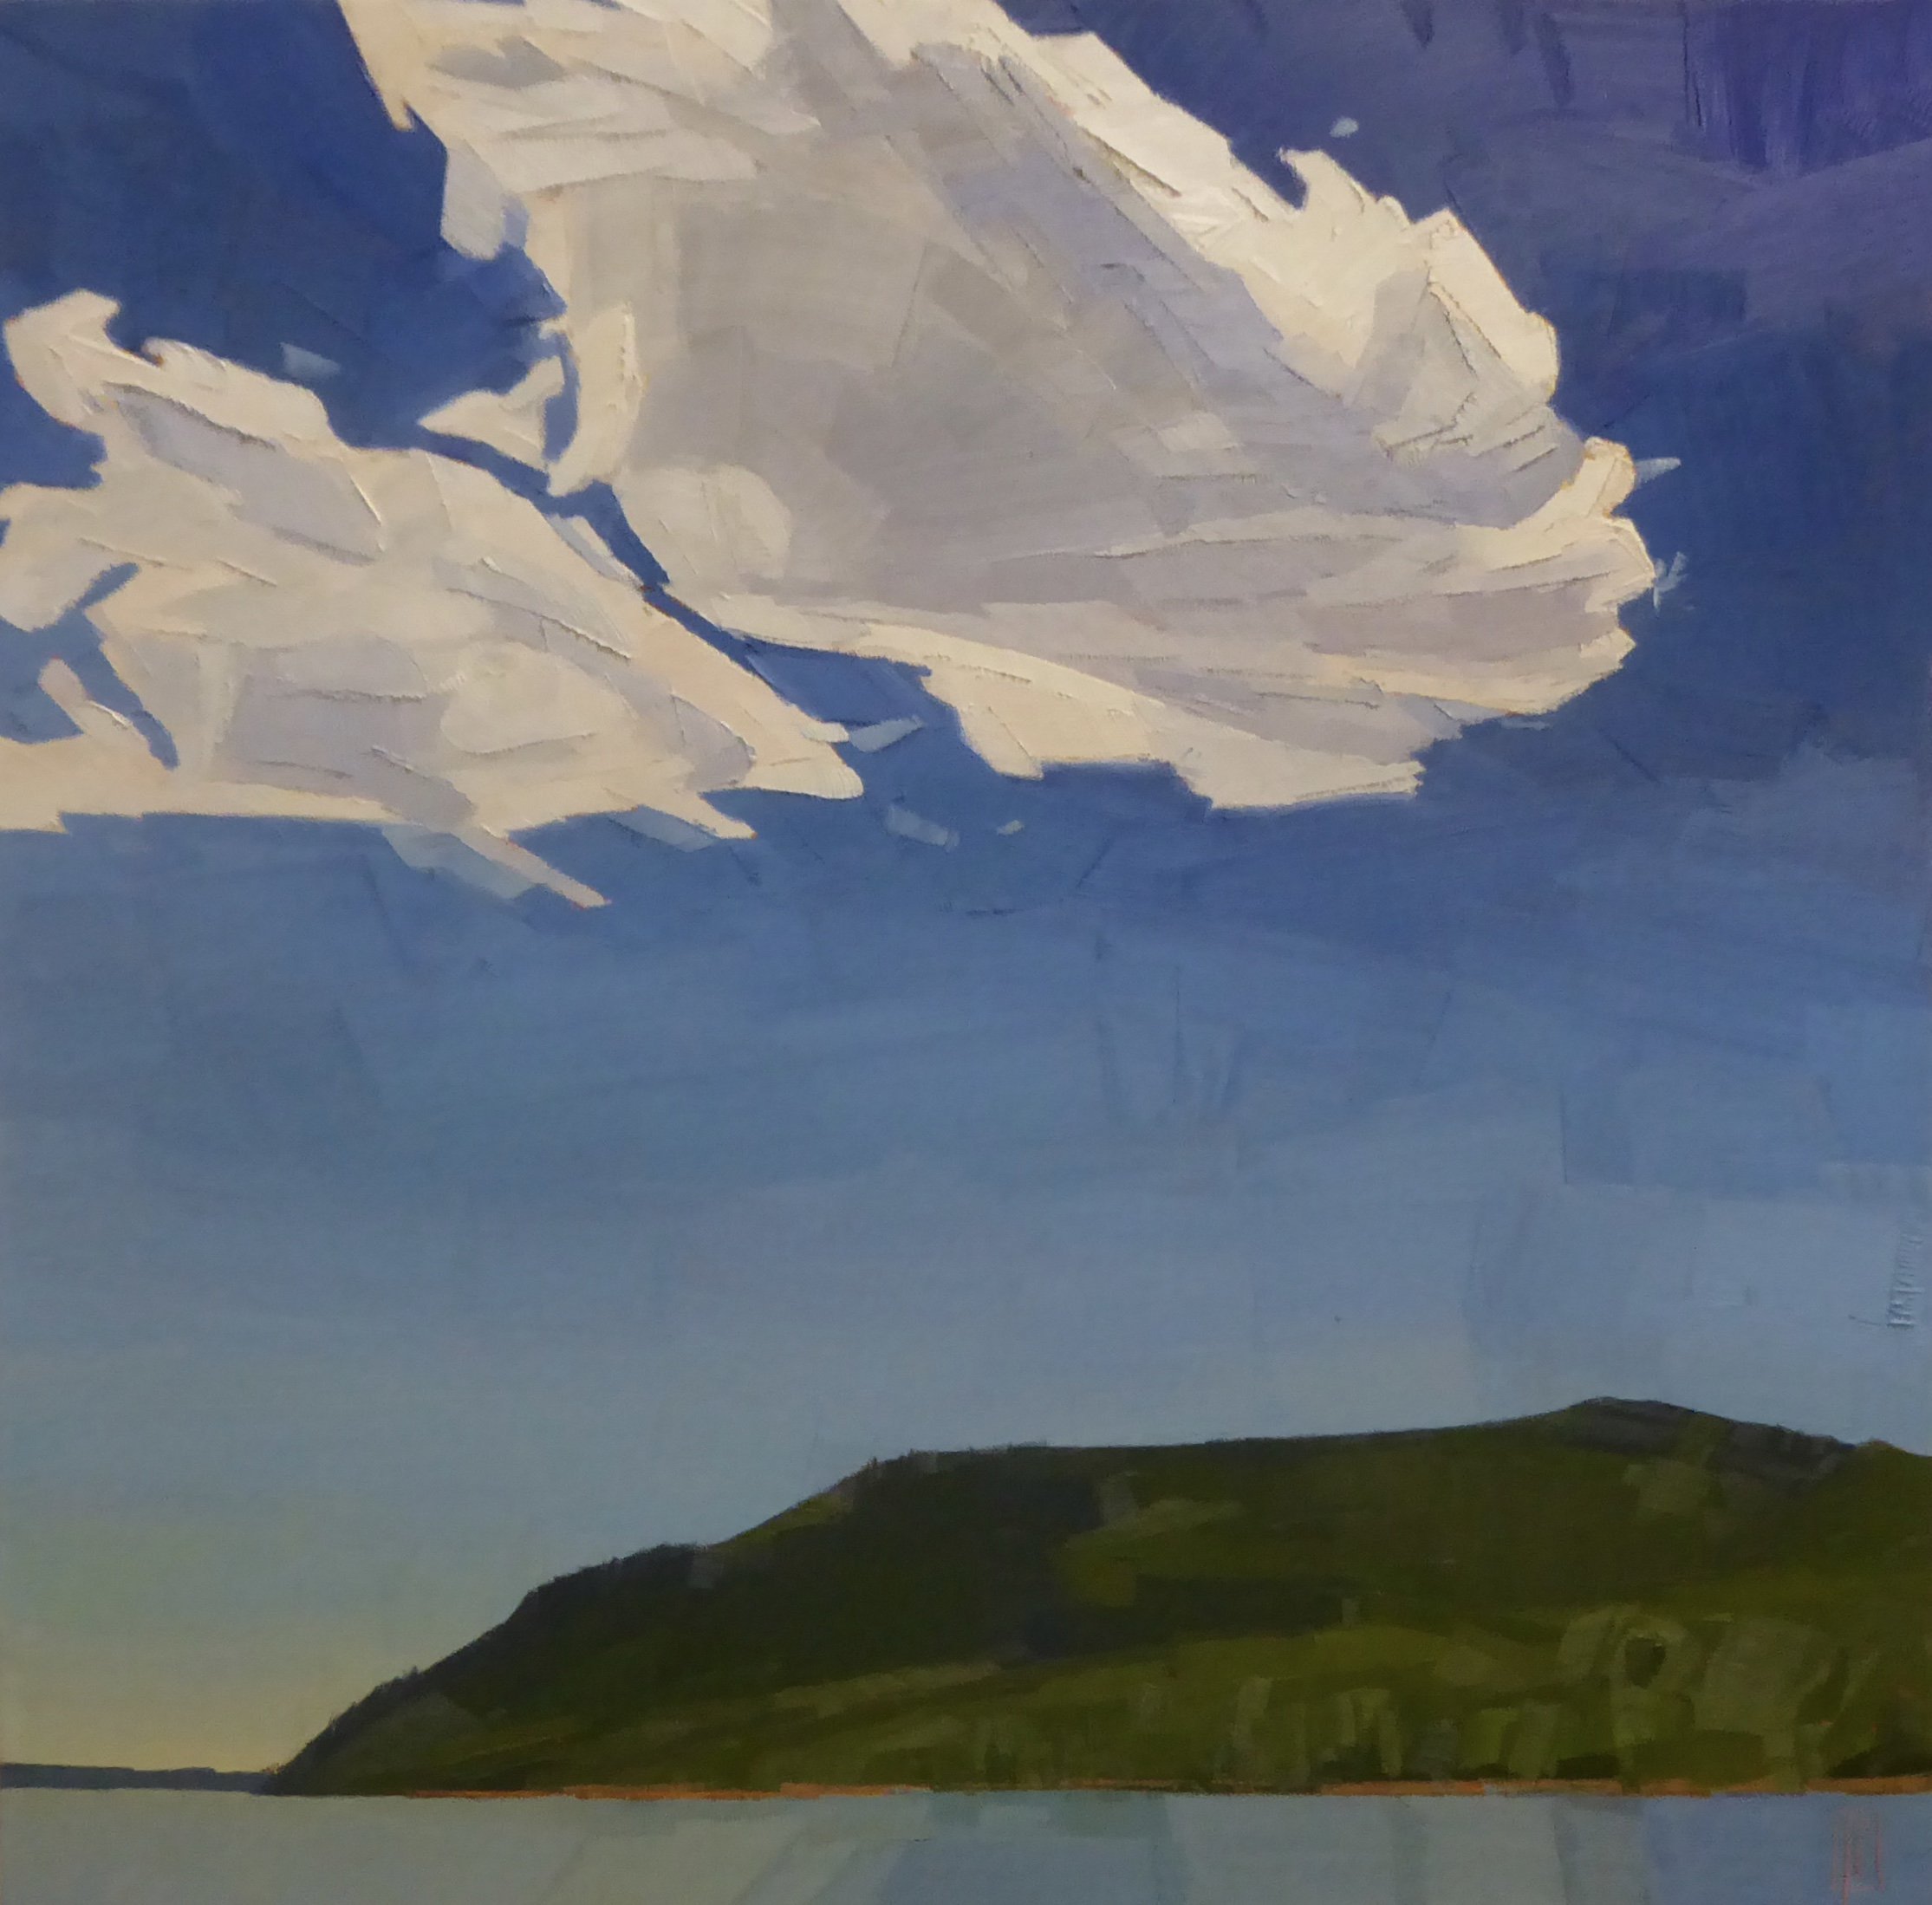   Two Clouds and Mountain  18 x 18 oil on linen   Alpers Fine Art  Rockport, MA 